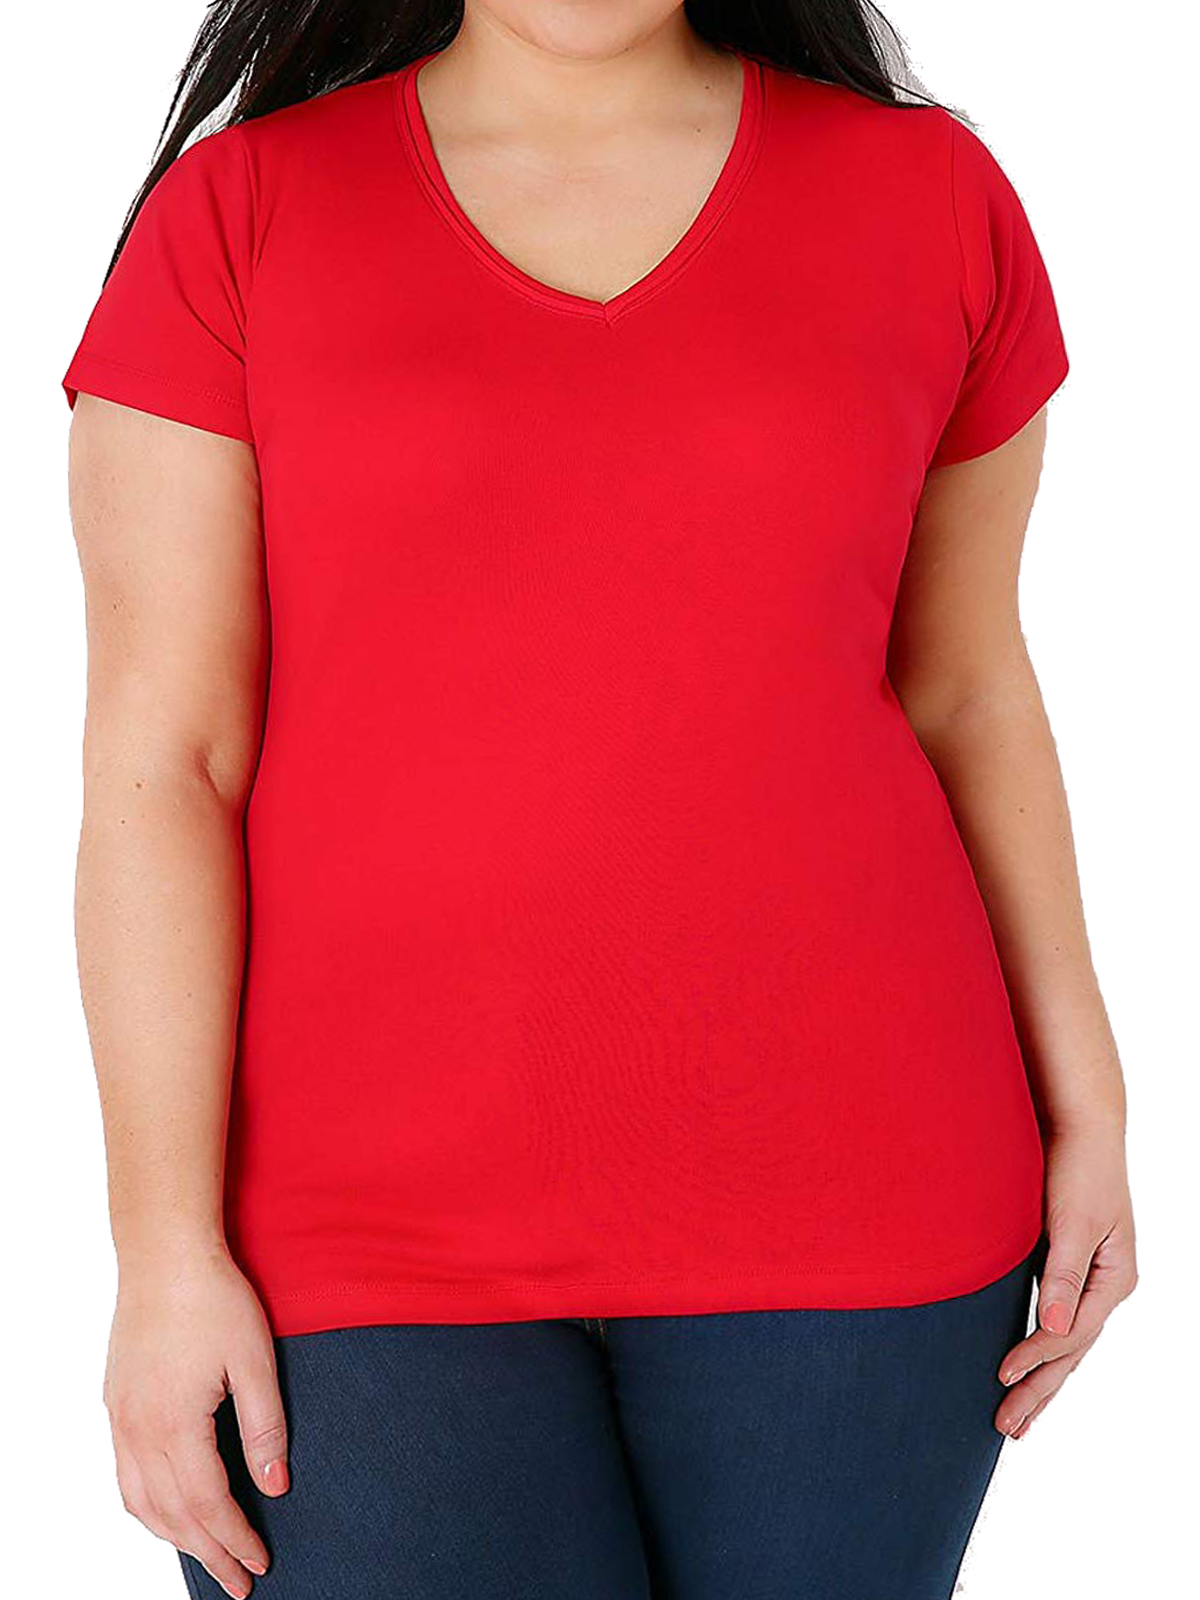 Y0URS - - Yours RED Pure Cotton Ribbed V-Neck T-Shirt - Plus Size 16 to